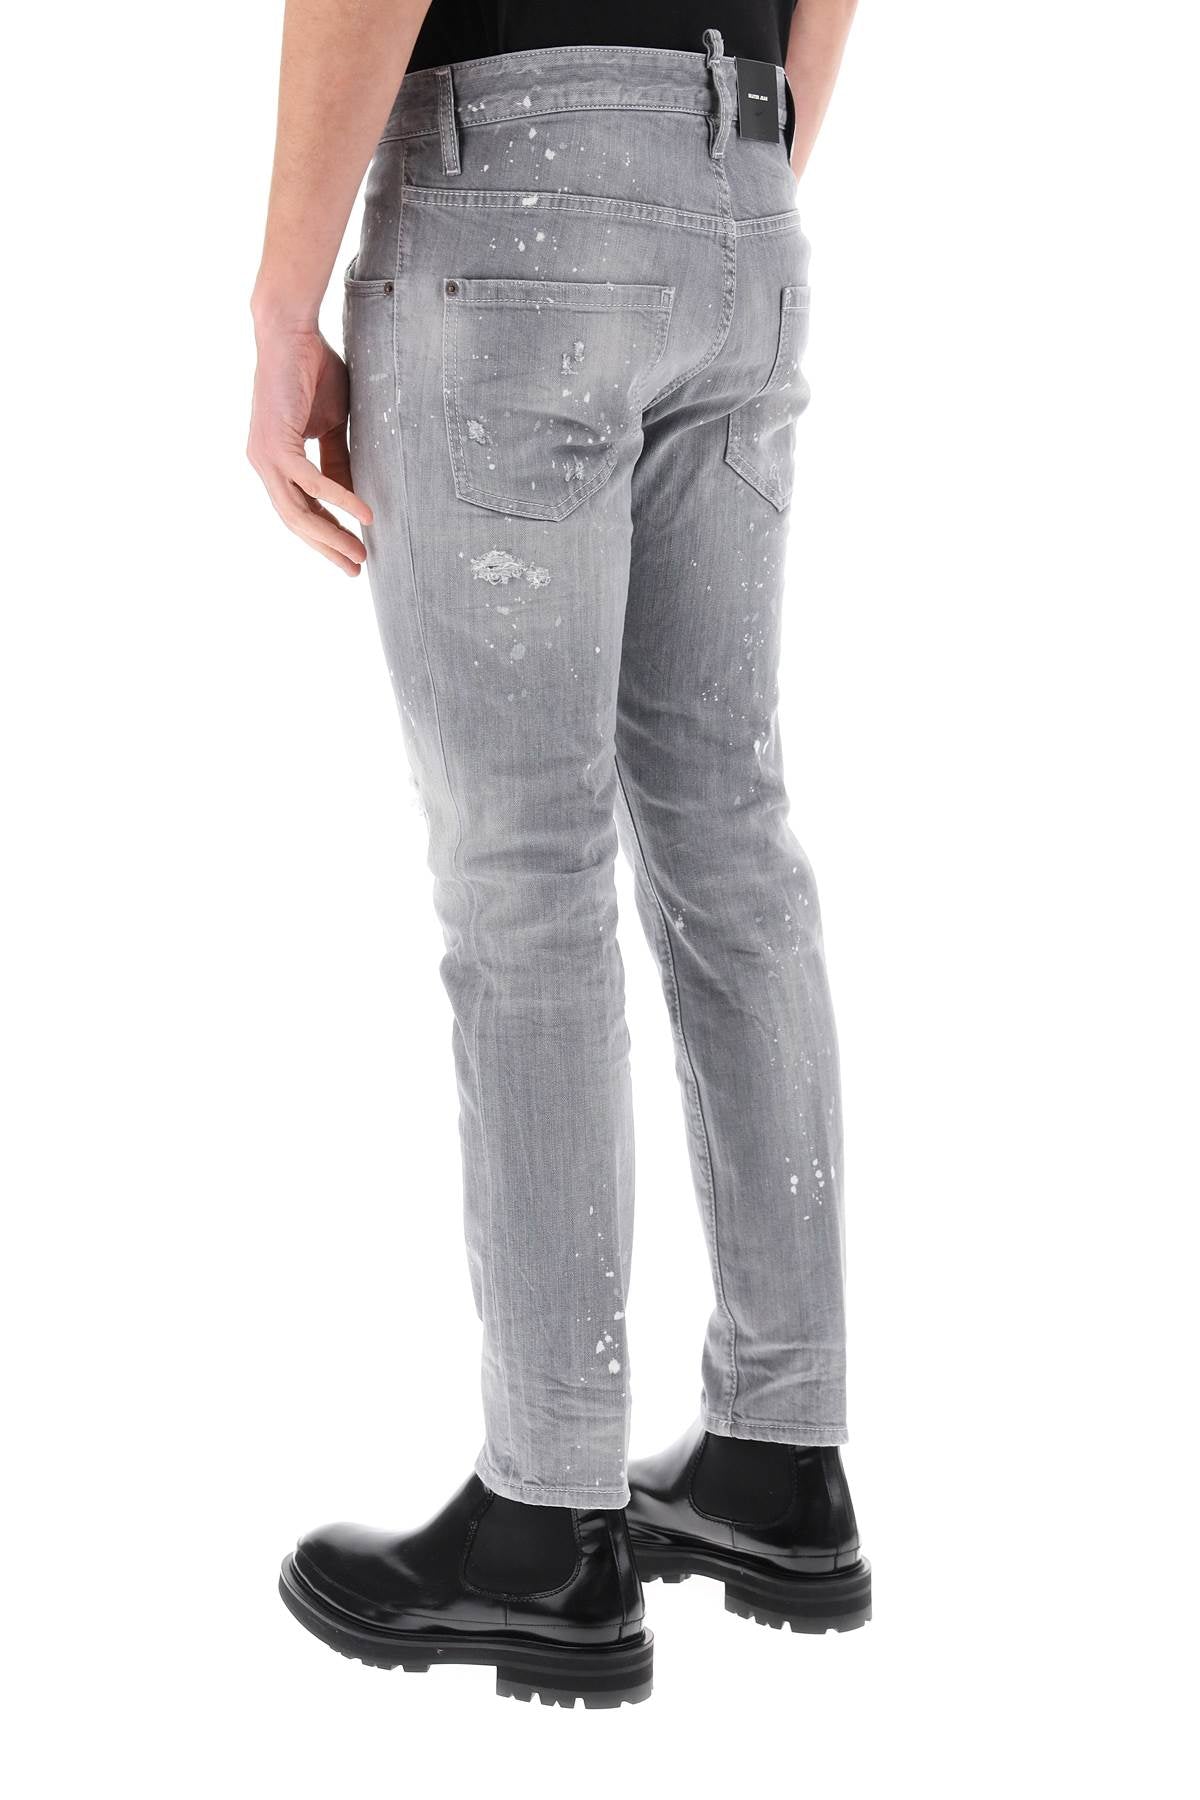 Dsquared2 skater jeans in grey spotted wash-2